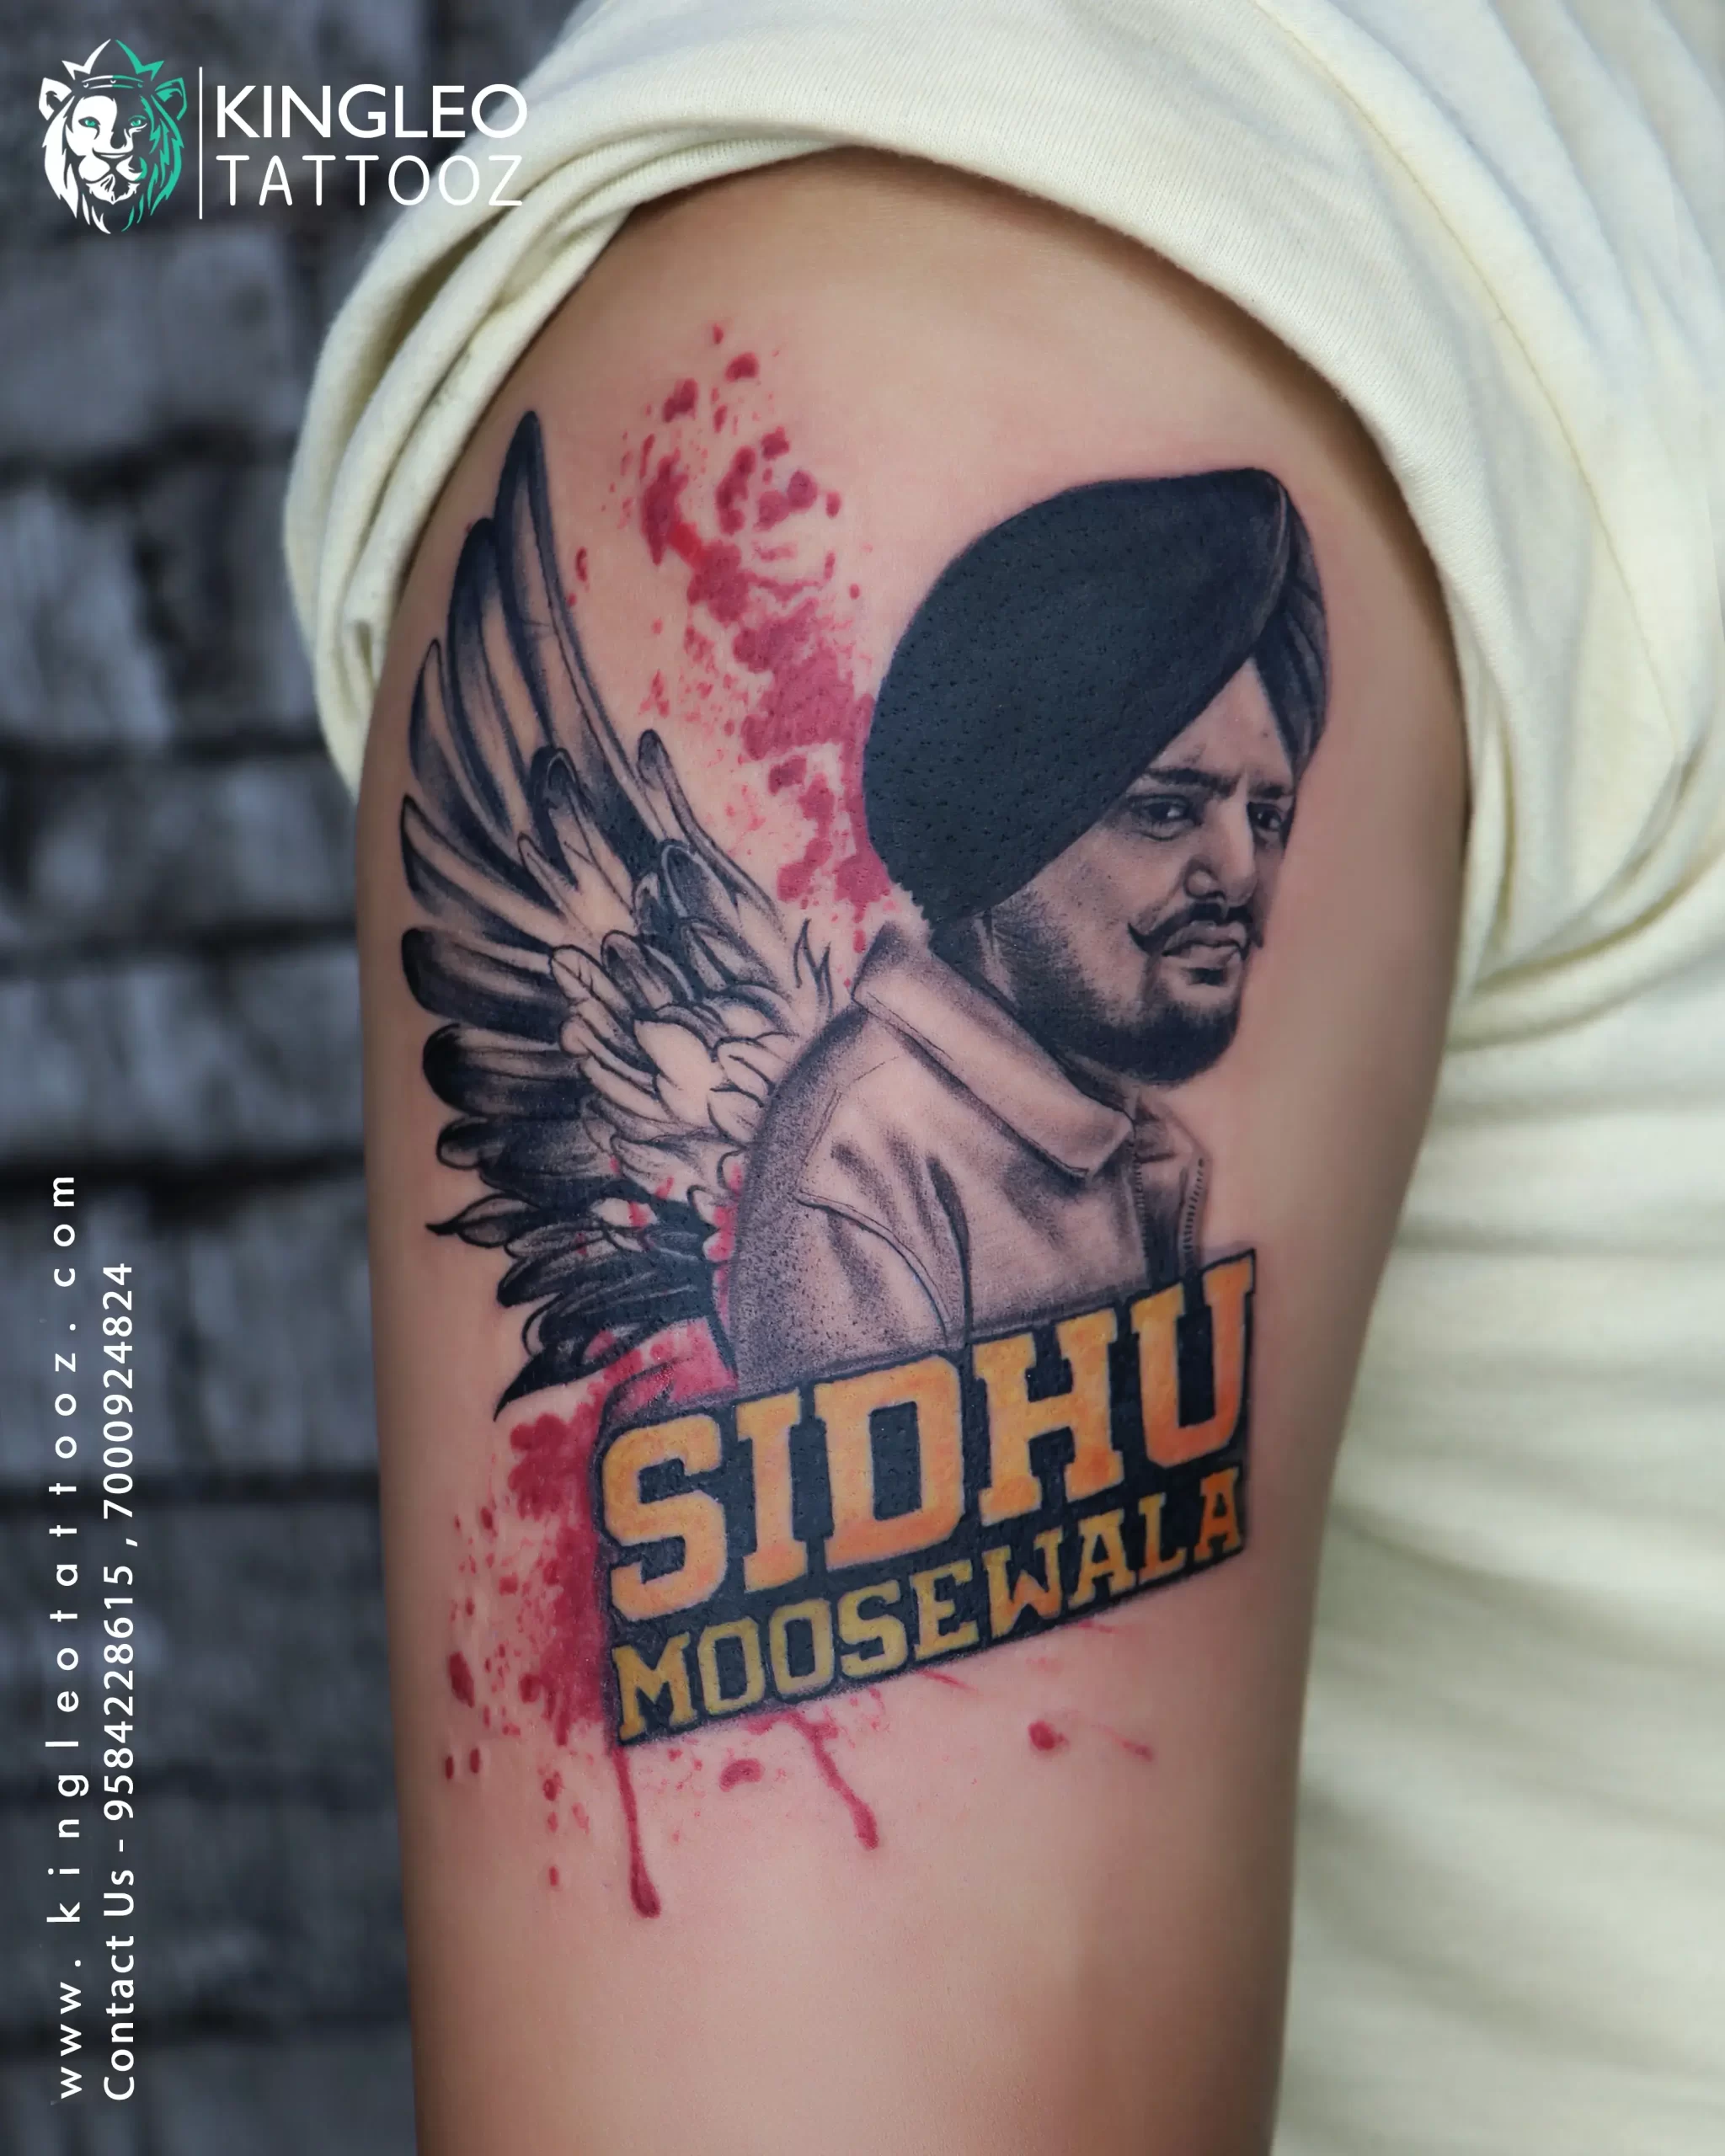 Giving a Tribute to Sidhu Moosewala With his Picture and 5911 Print | Tattoo  Ink Master